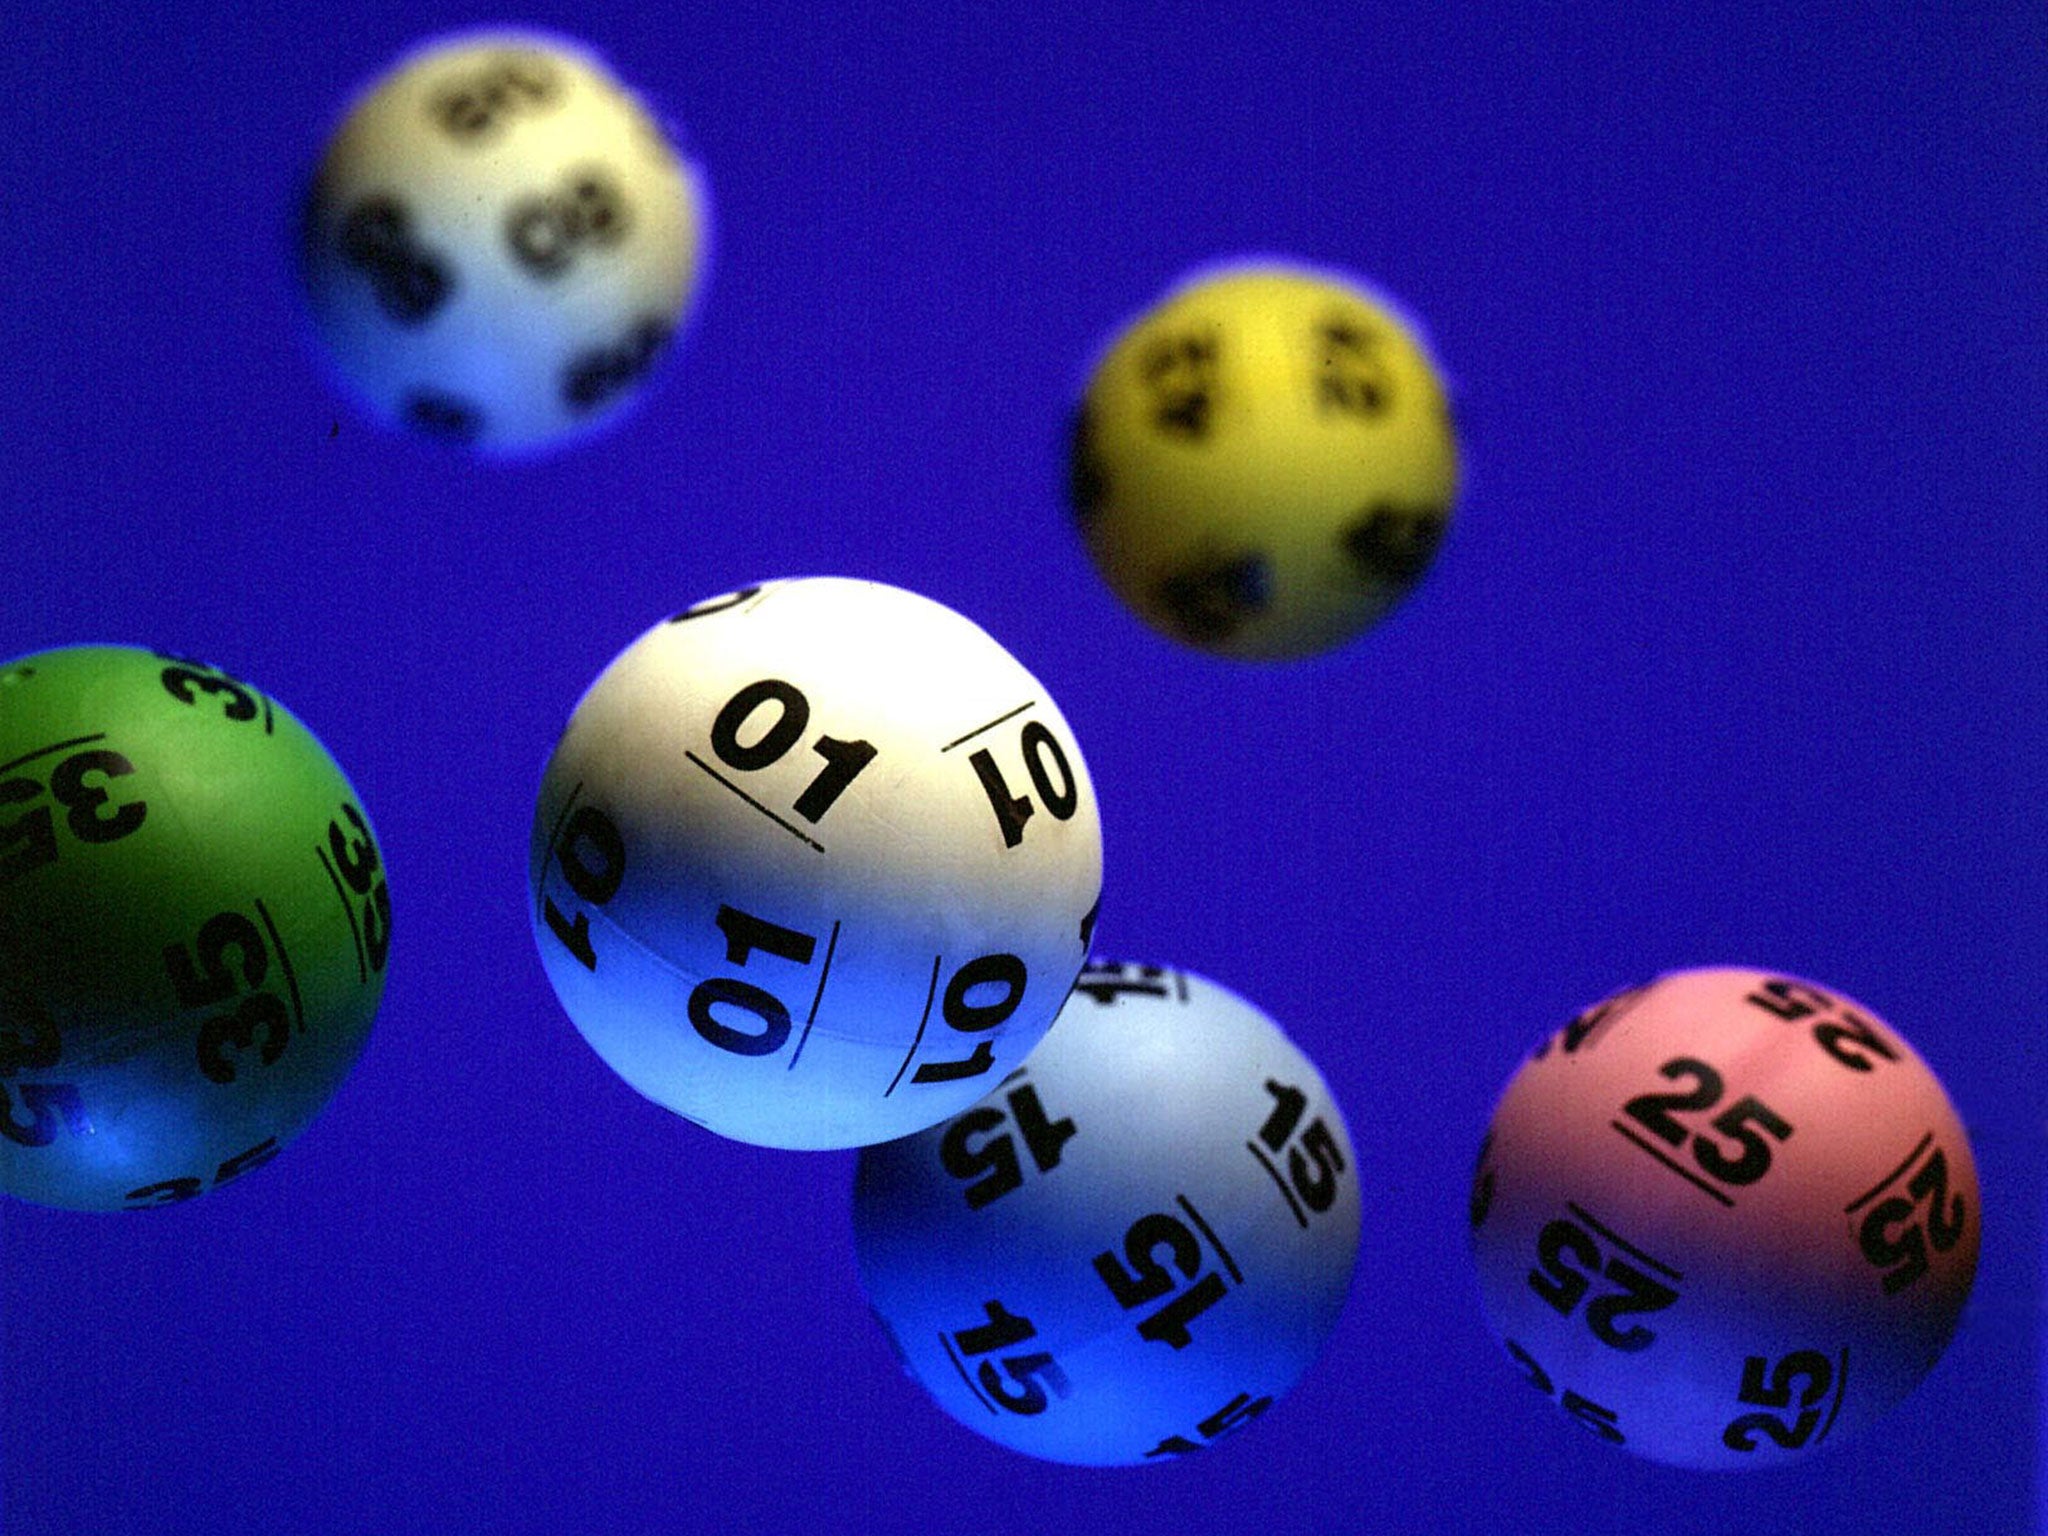 time of tonight's lotto draw